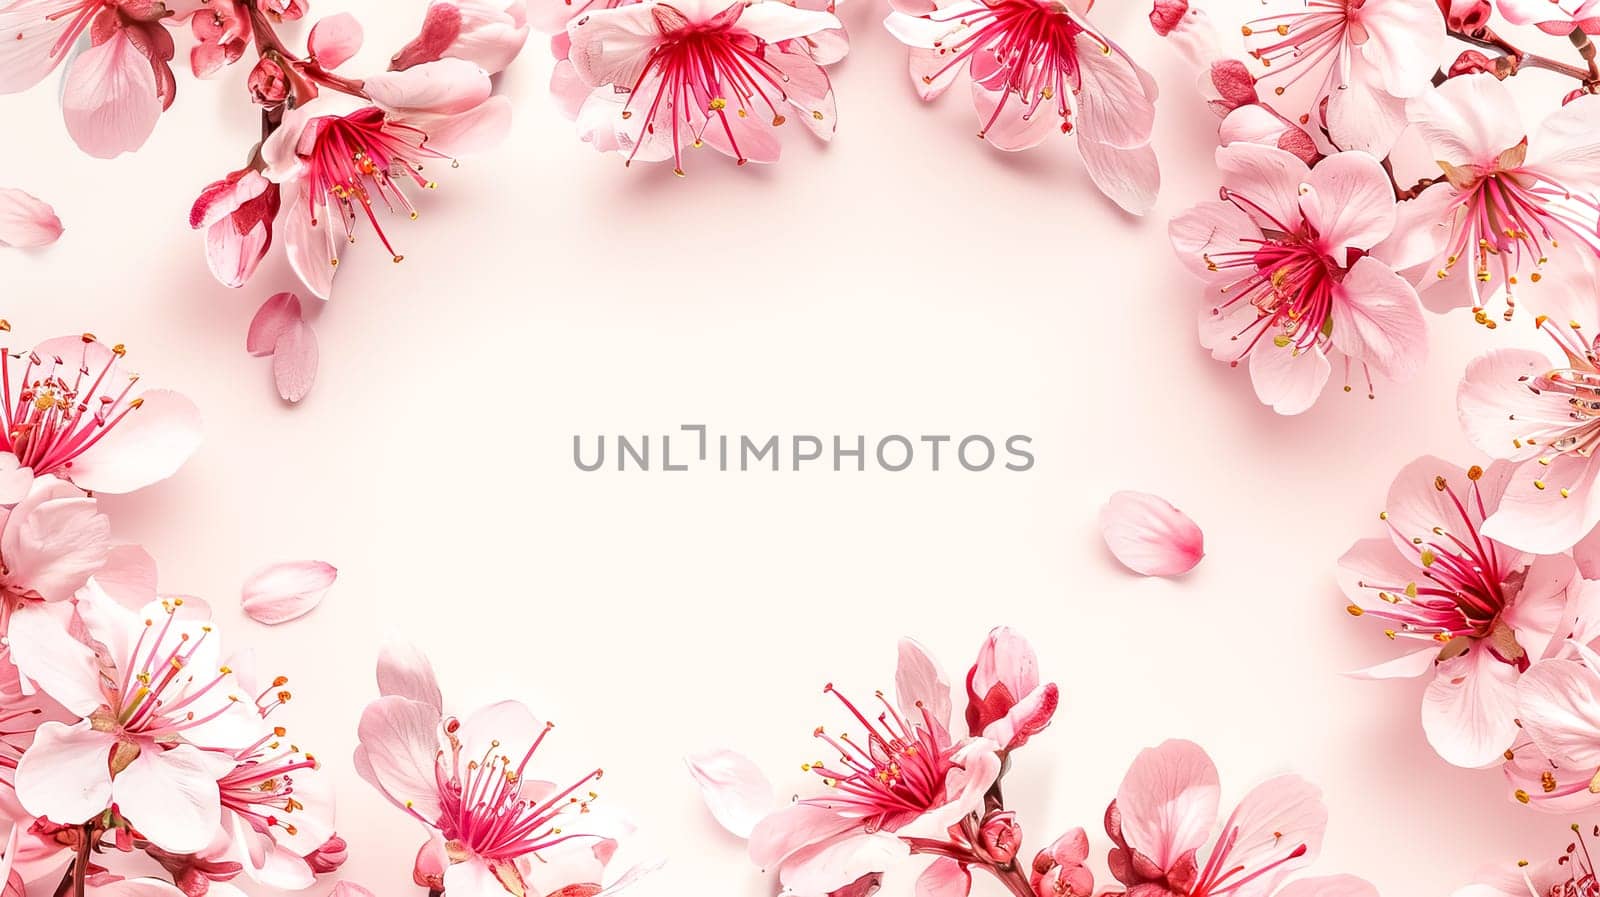 Delicate cherry blossoms frame the top and bottom on a gentle pink background